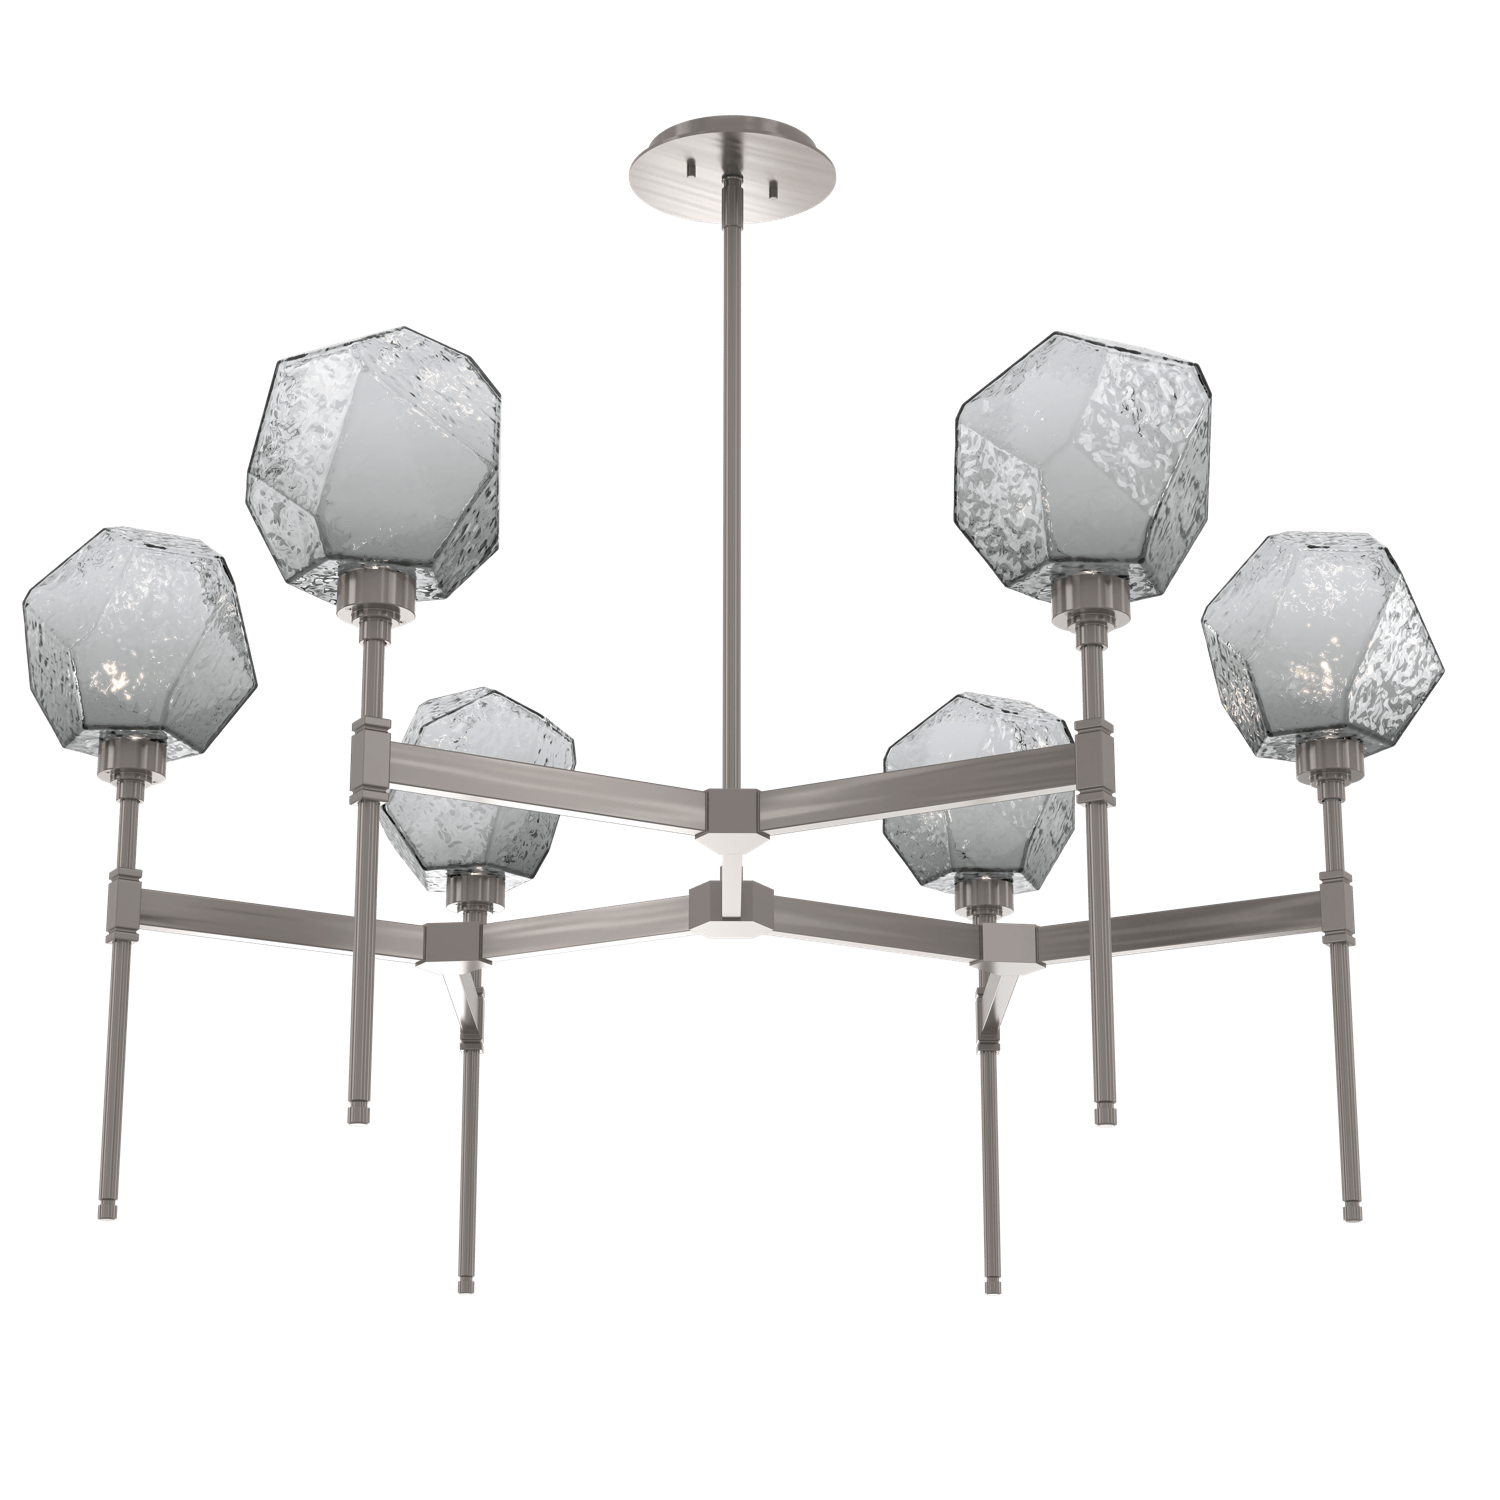 CHB0039-39-GM-S-Hammerton-Studio-Gem-round-belvedere-chandelier-with-gunmetal-finish-and-smoke-blown-glass-shades-and-LED-lamping